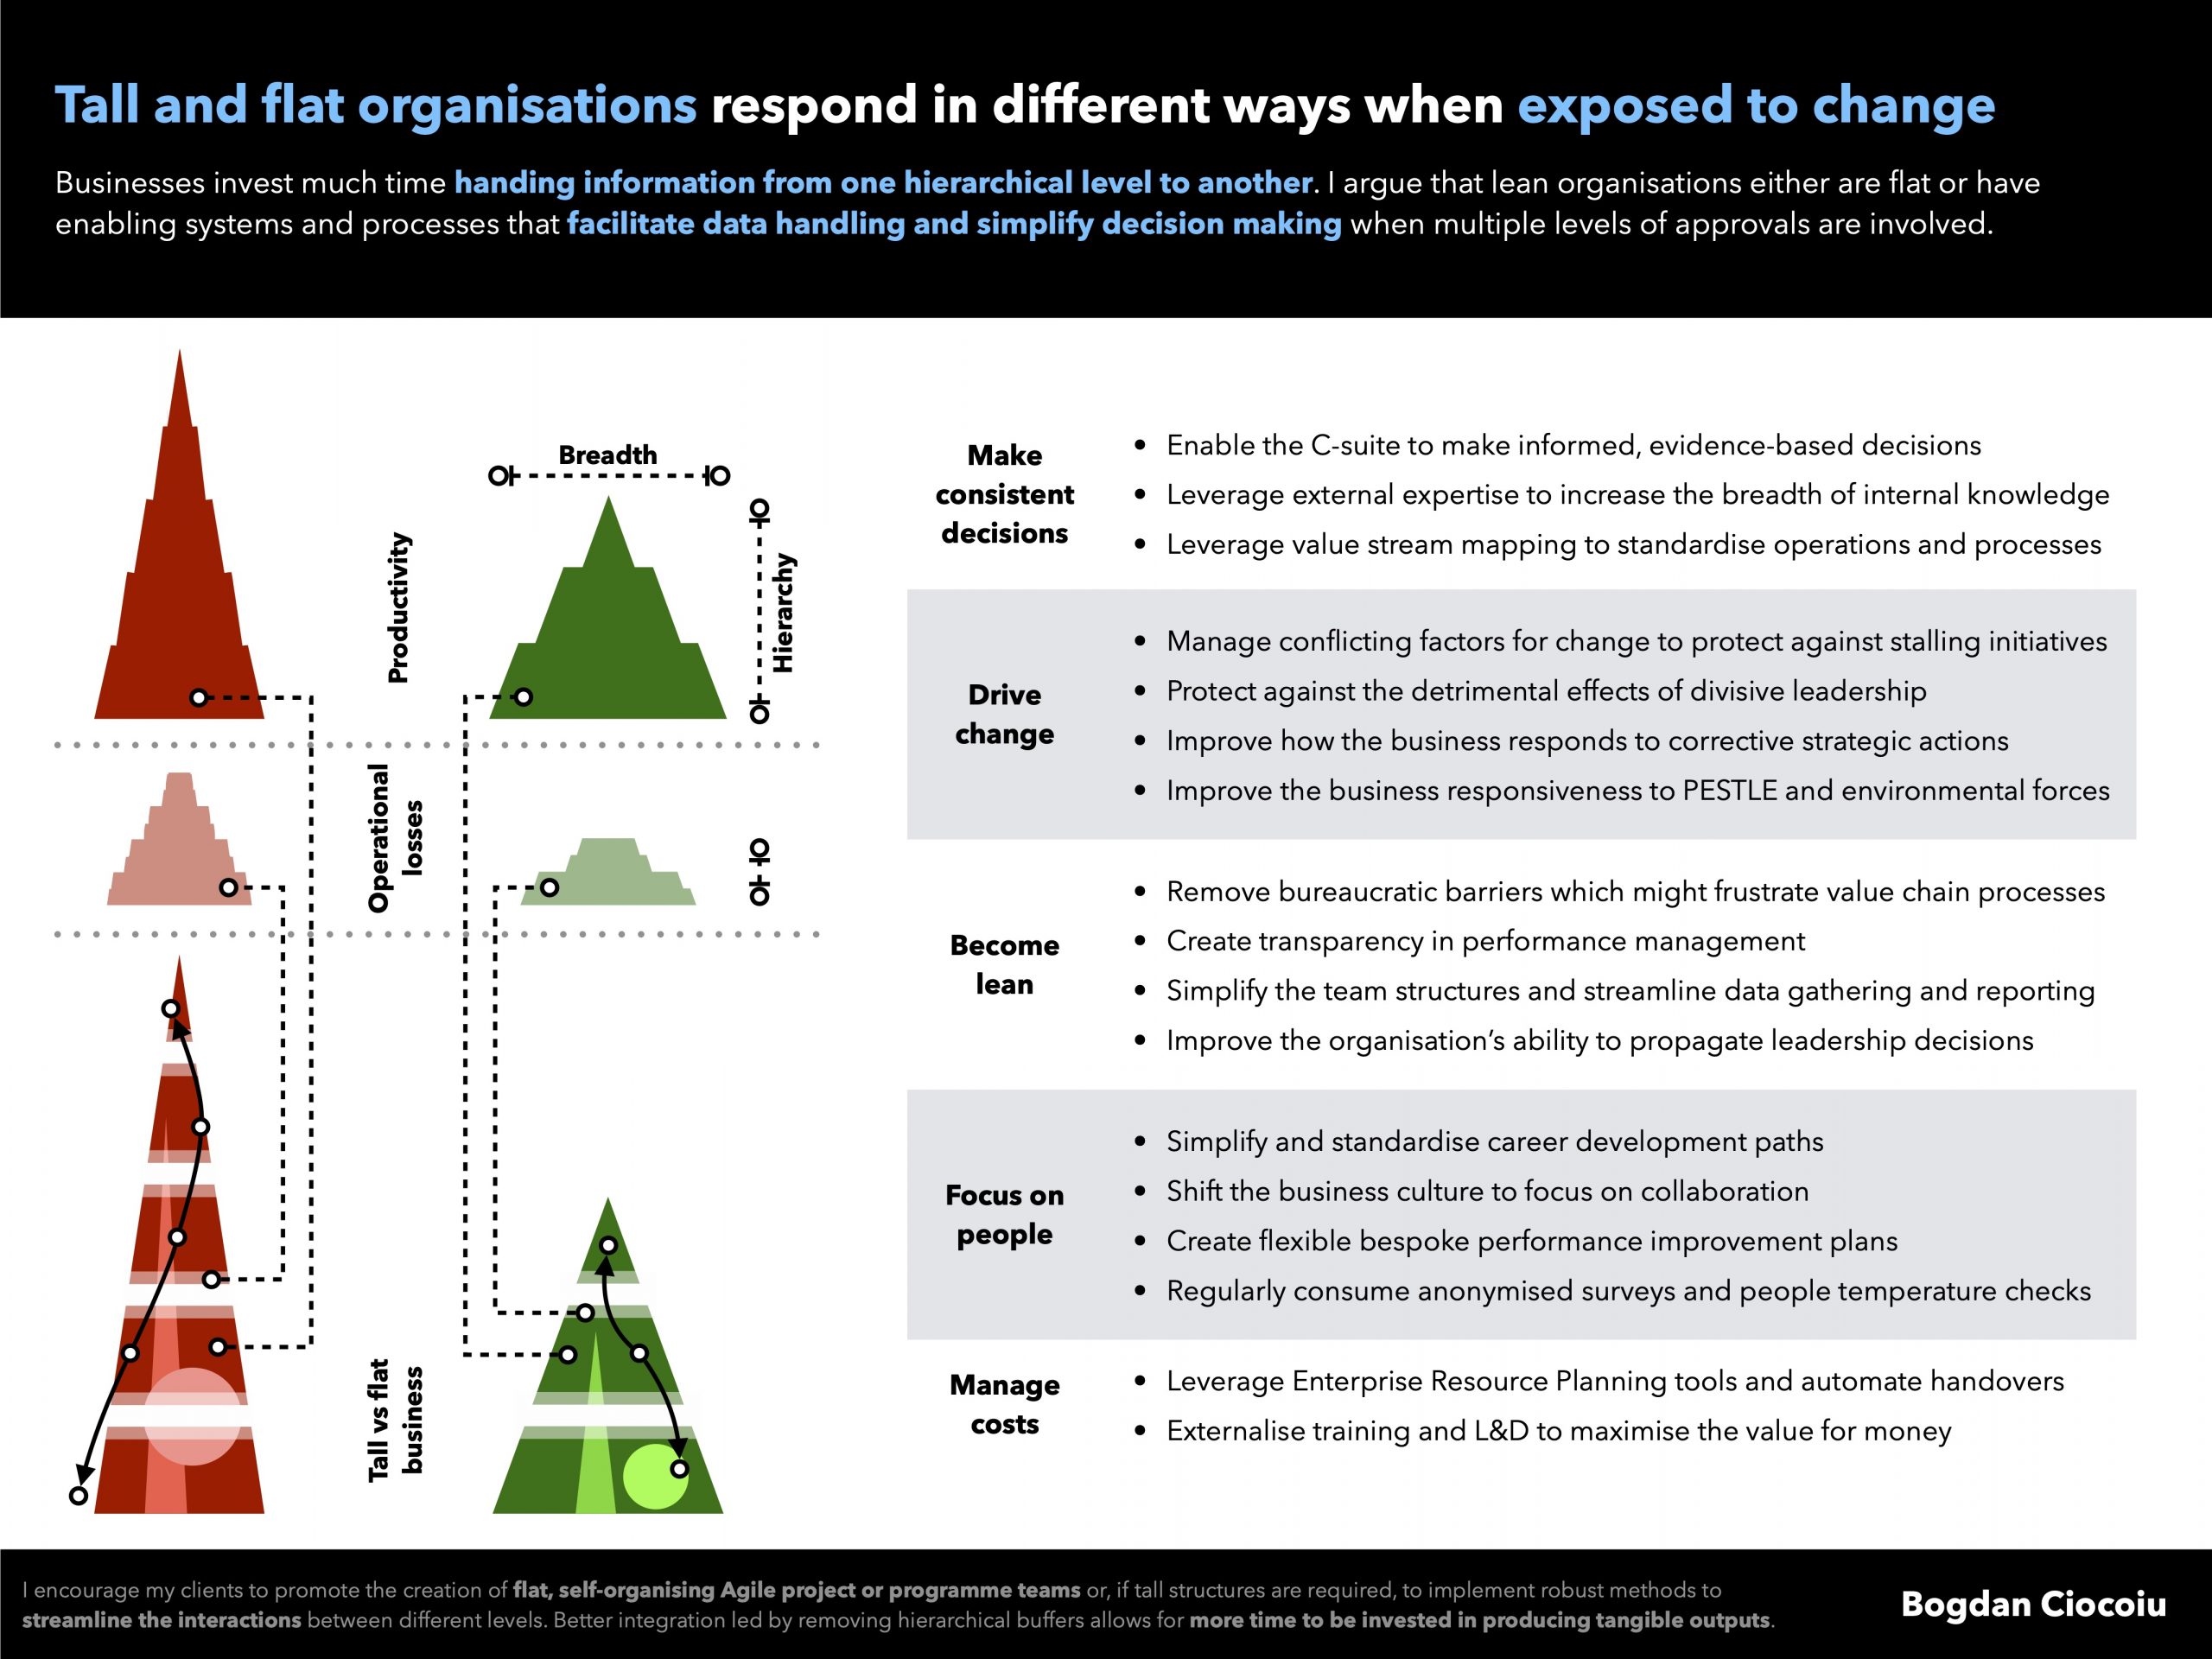 Tall and flat organizations respond in different ways when exposed to change - Bogdan Ciocoiu